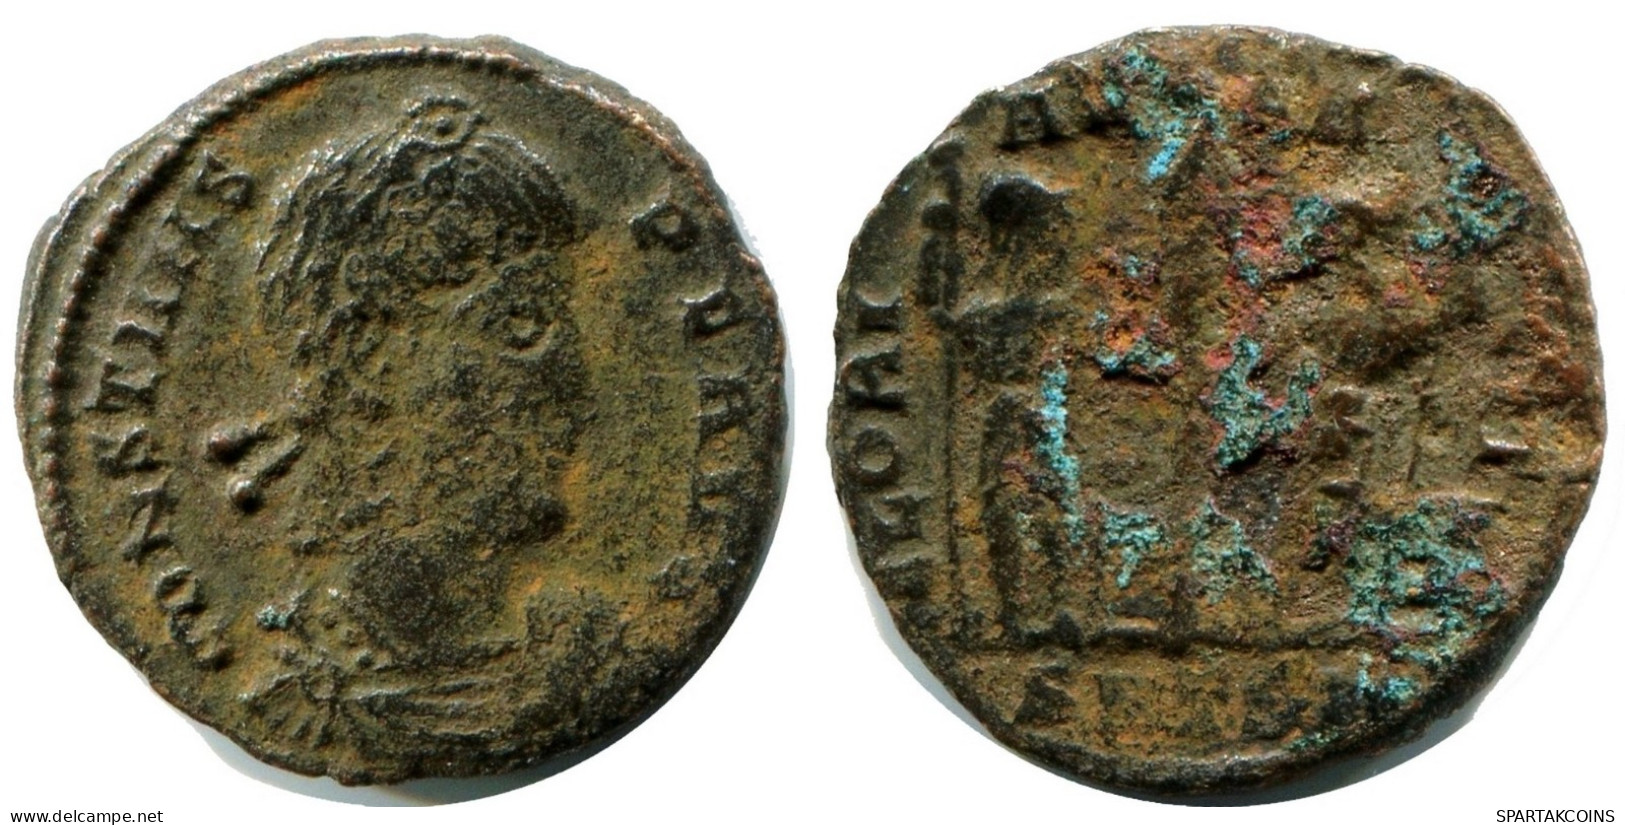 CONSTANS MINTED IN THESSALONICA FROM THE ROYAL ONTARIO MUSEUM #ANC11883.14.F.A - El Impero Christiano (307 / 363)